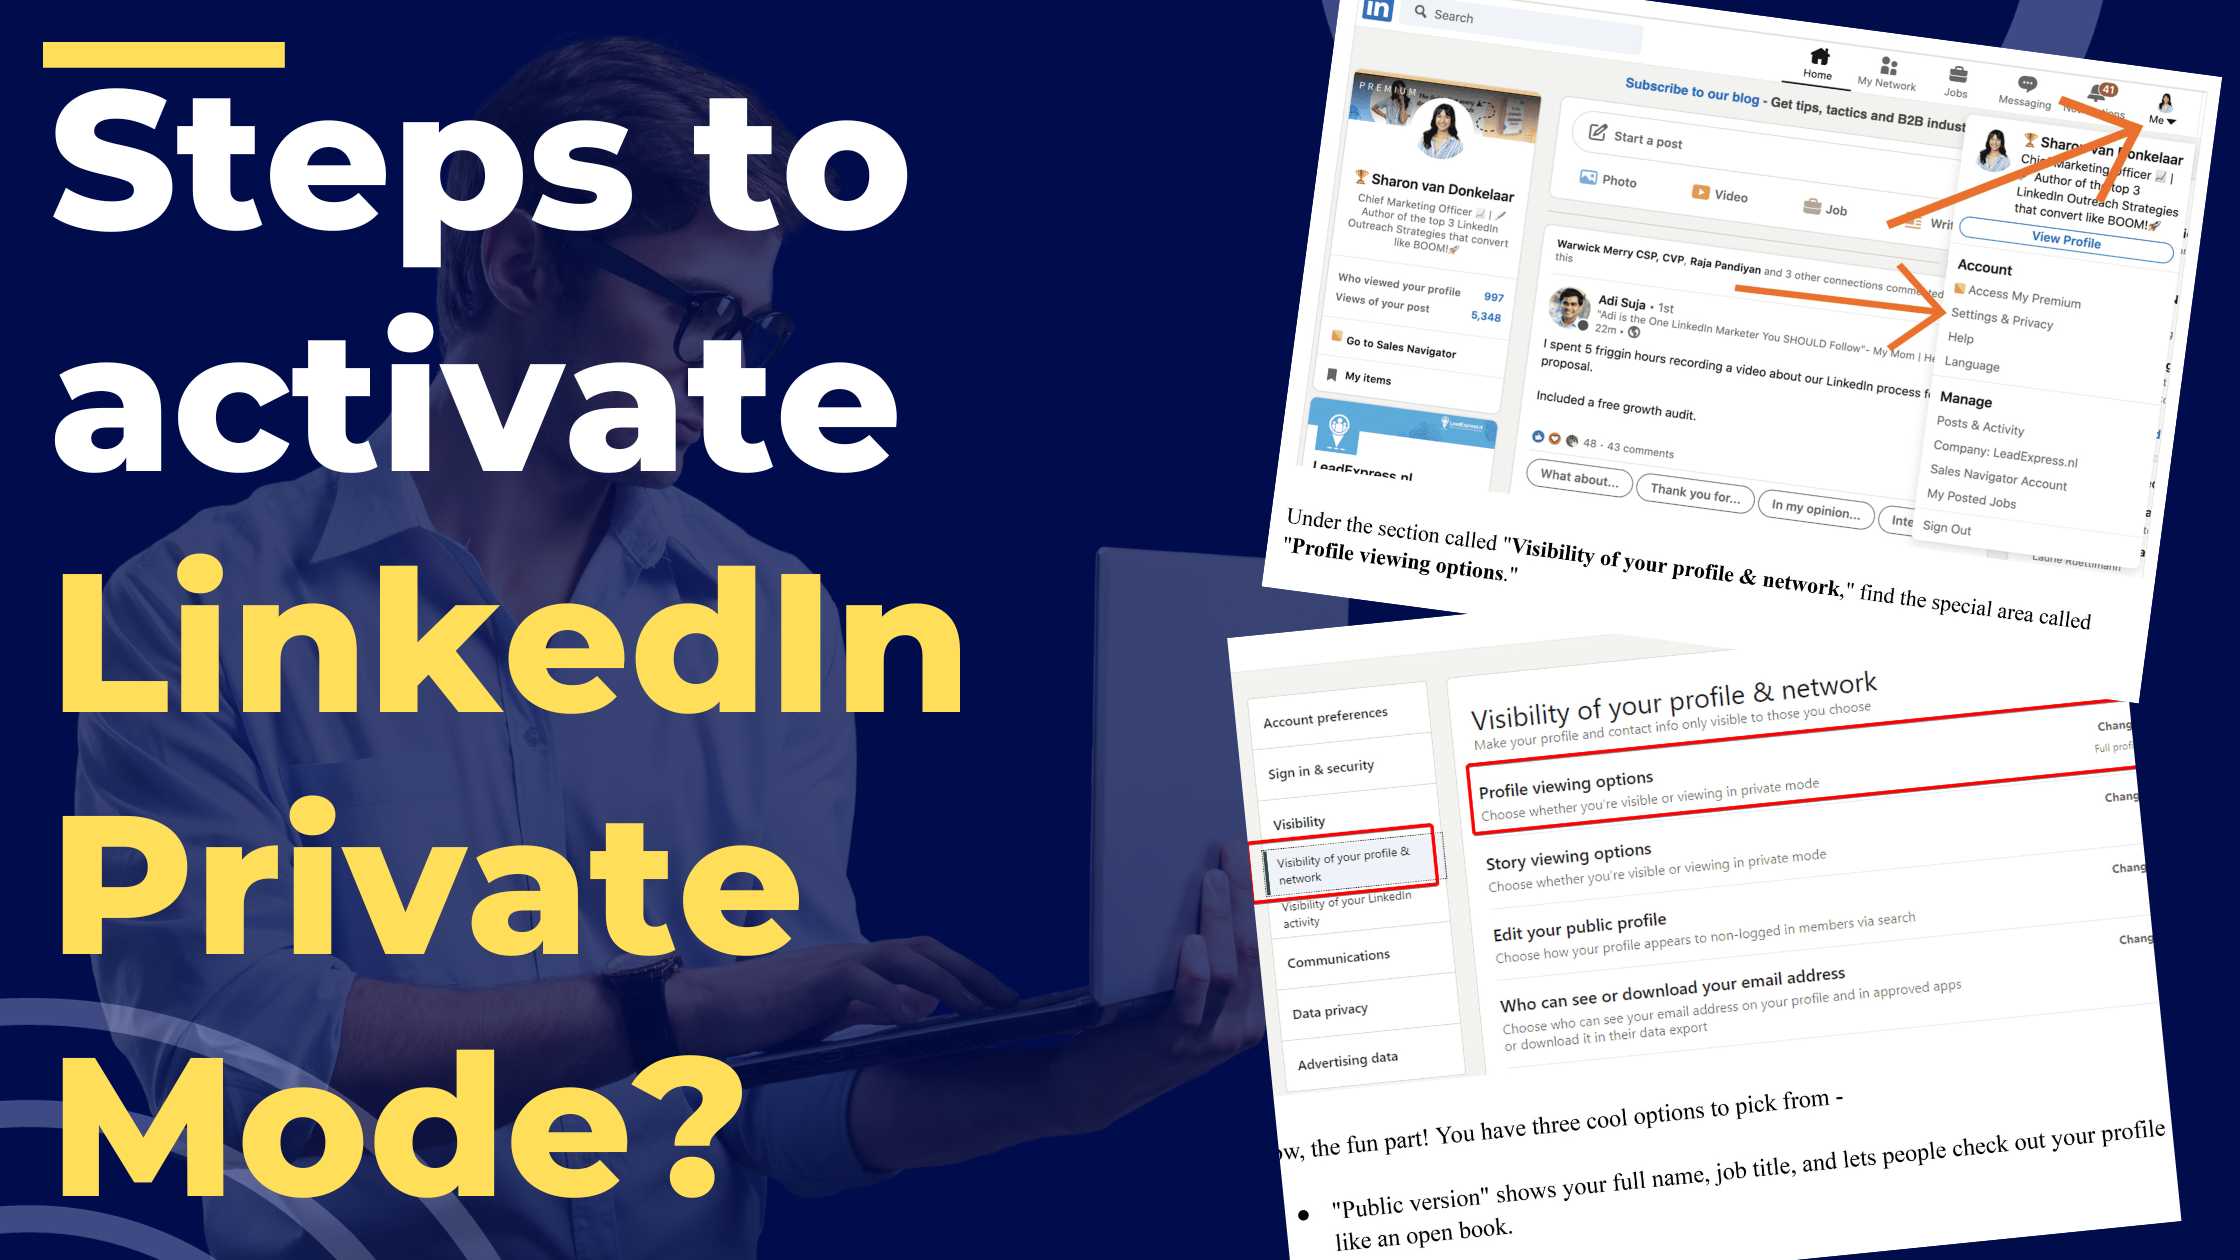 steps must be followed to activate LinkedIn Private Mode